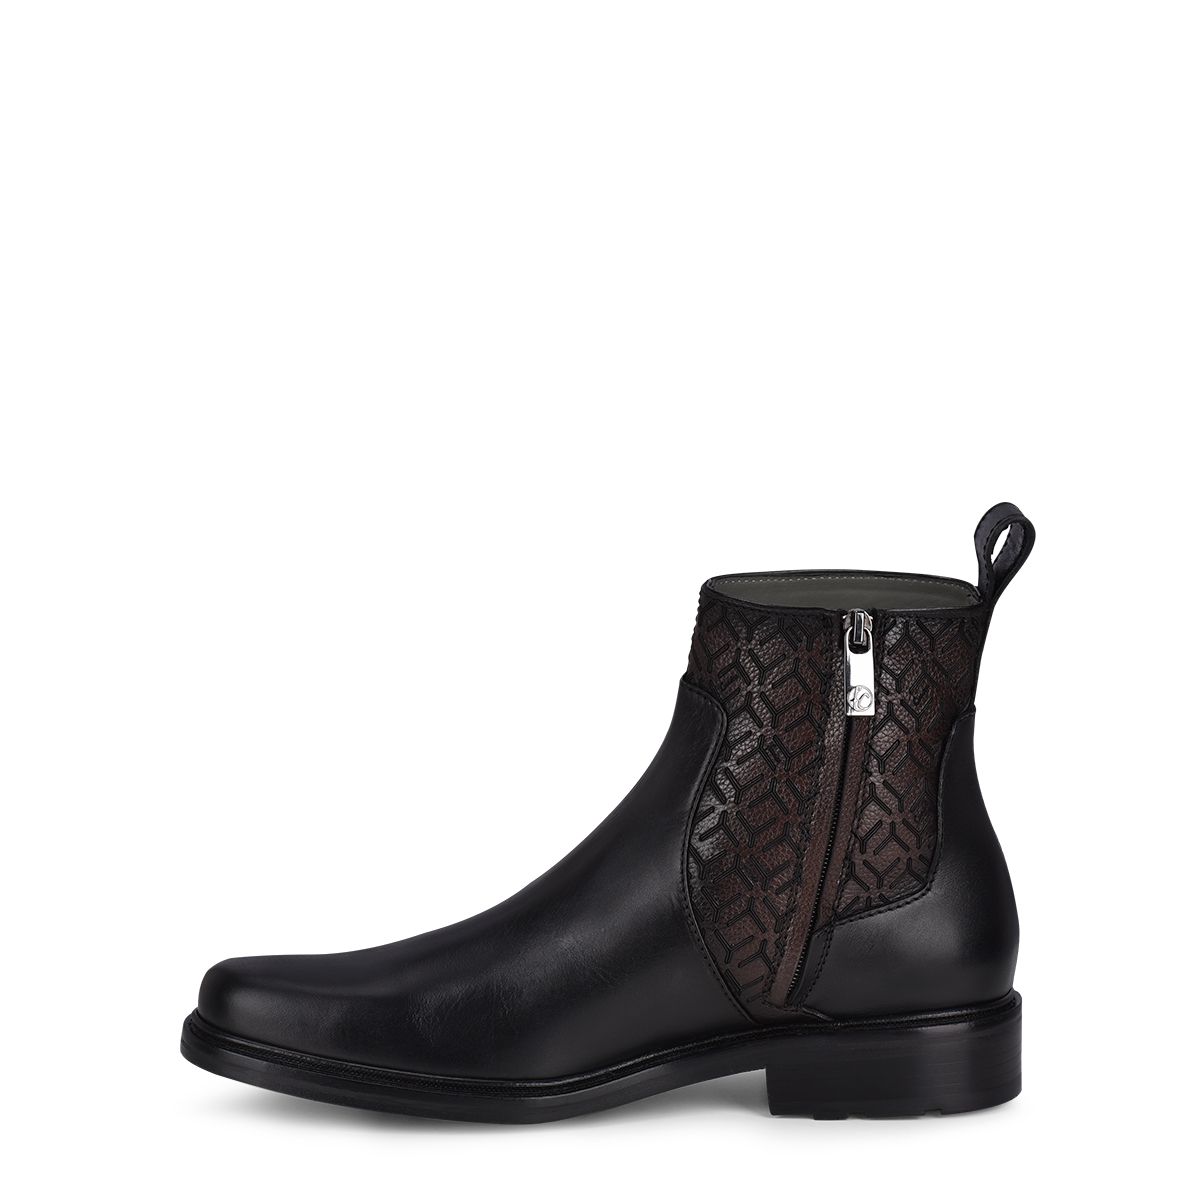 Hand-painted black leather engraved boot